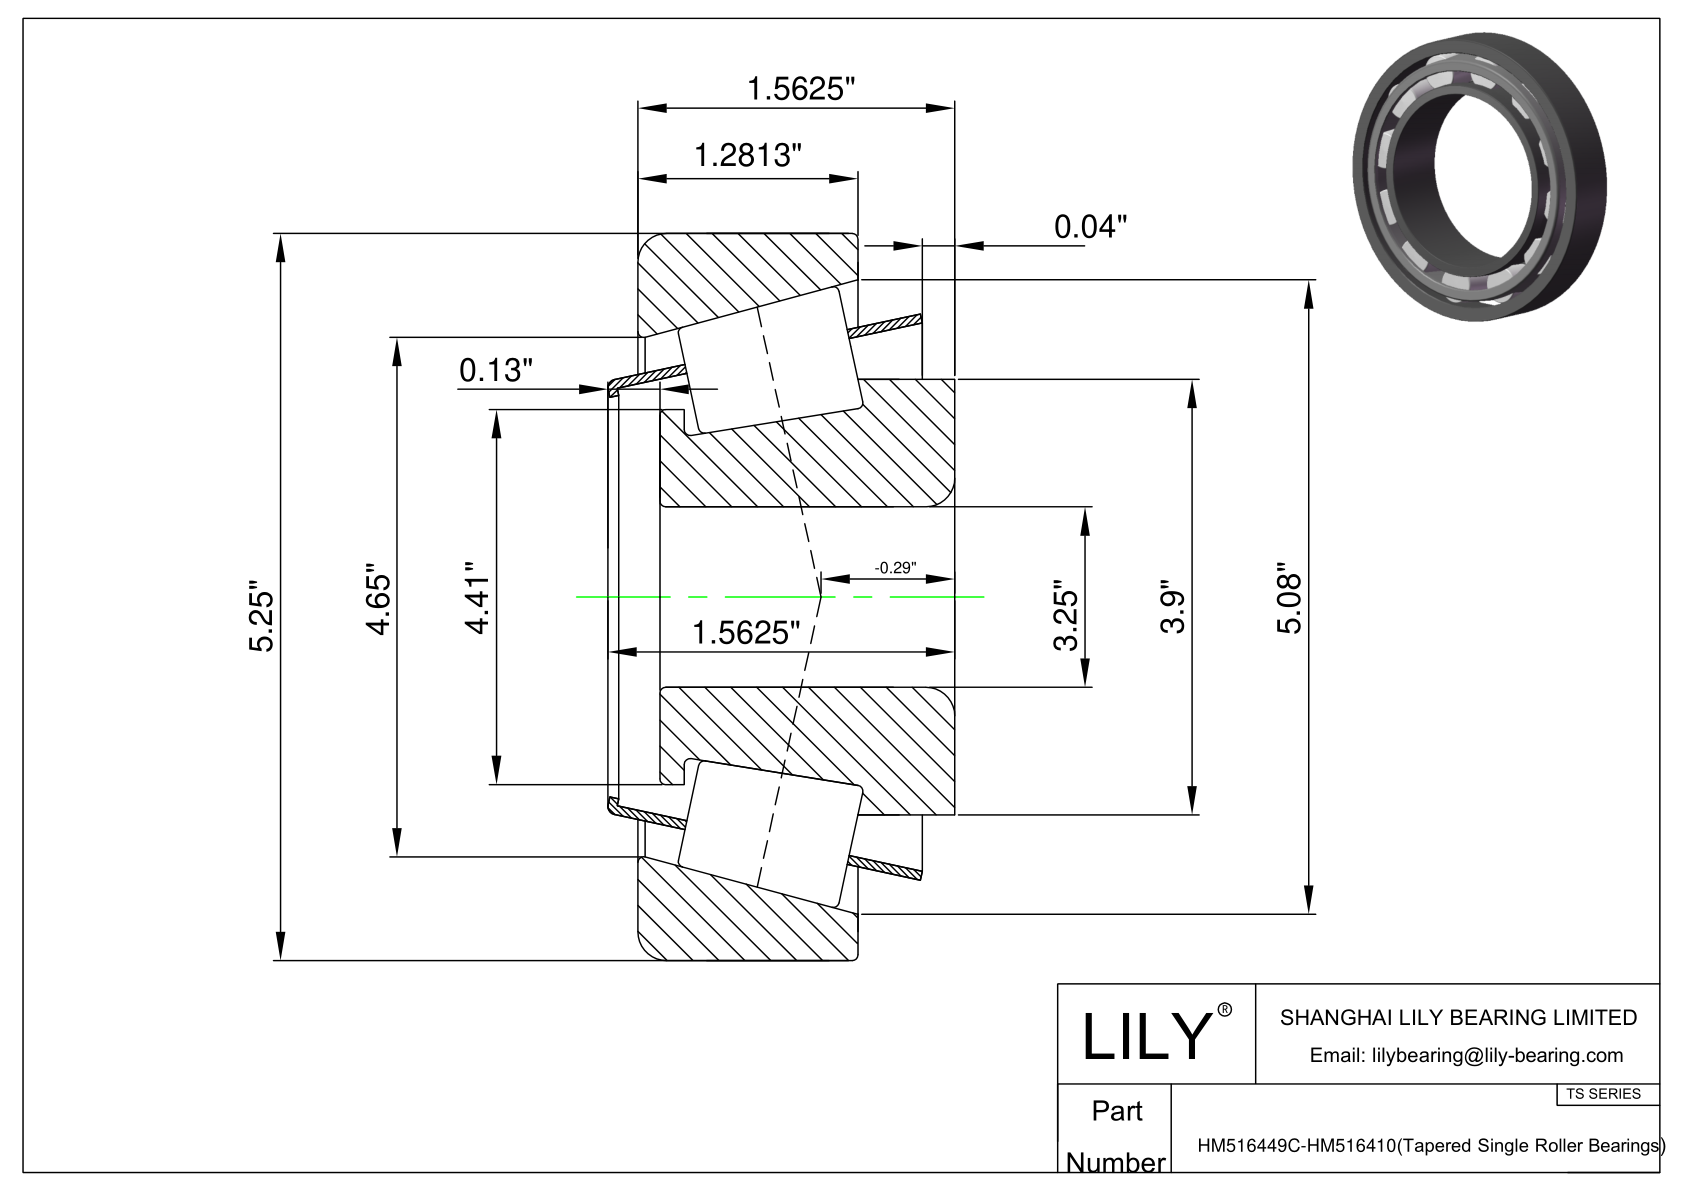 HM516449C-HM516410 TS (Tapered Single Roller Bearings) (Imperial) cad drawing